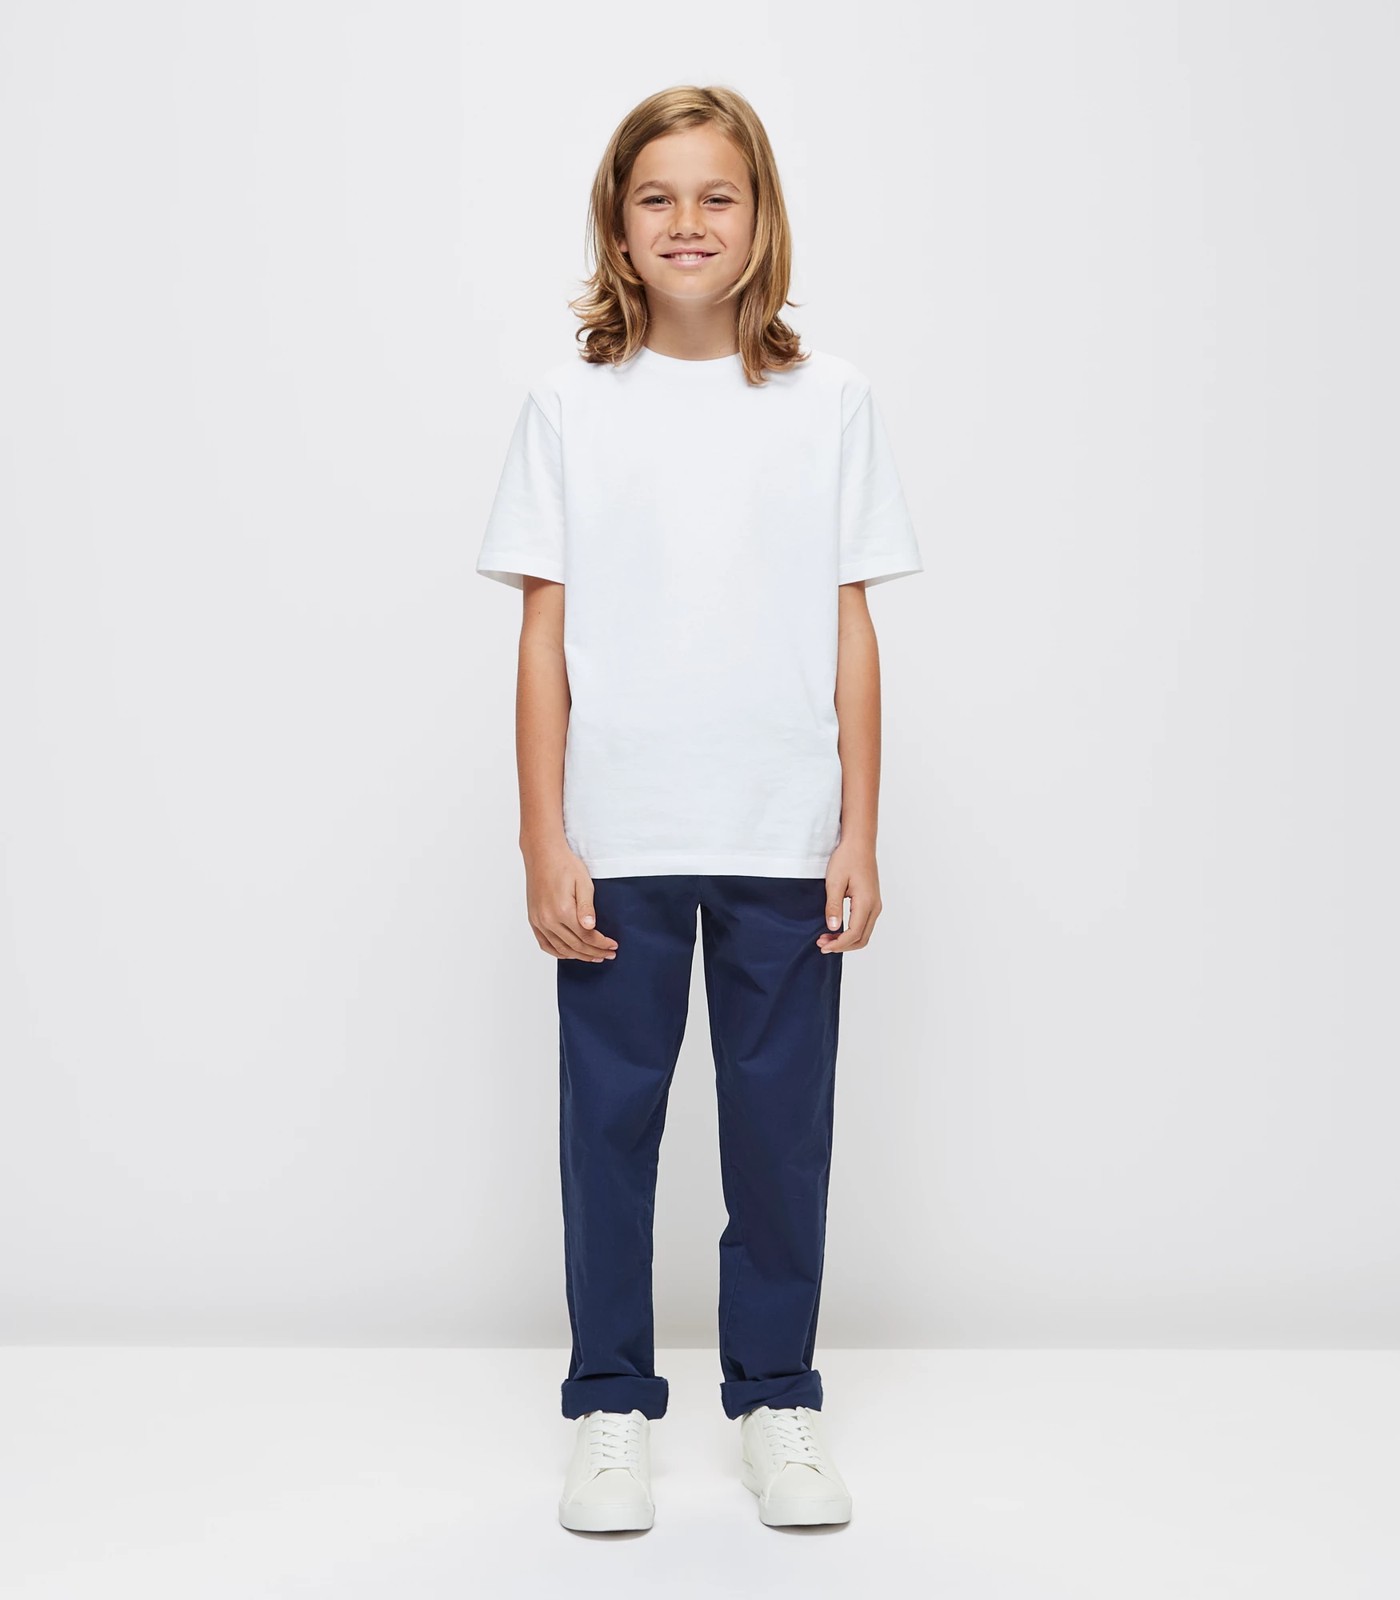 Relaxed Chino Pants - Navy Blue | Target Australia